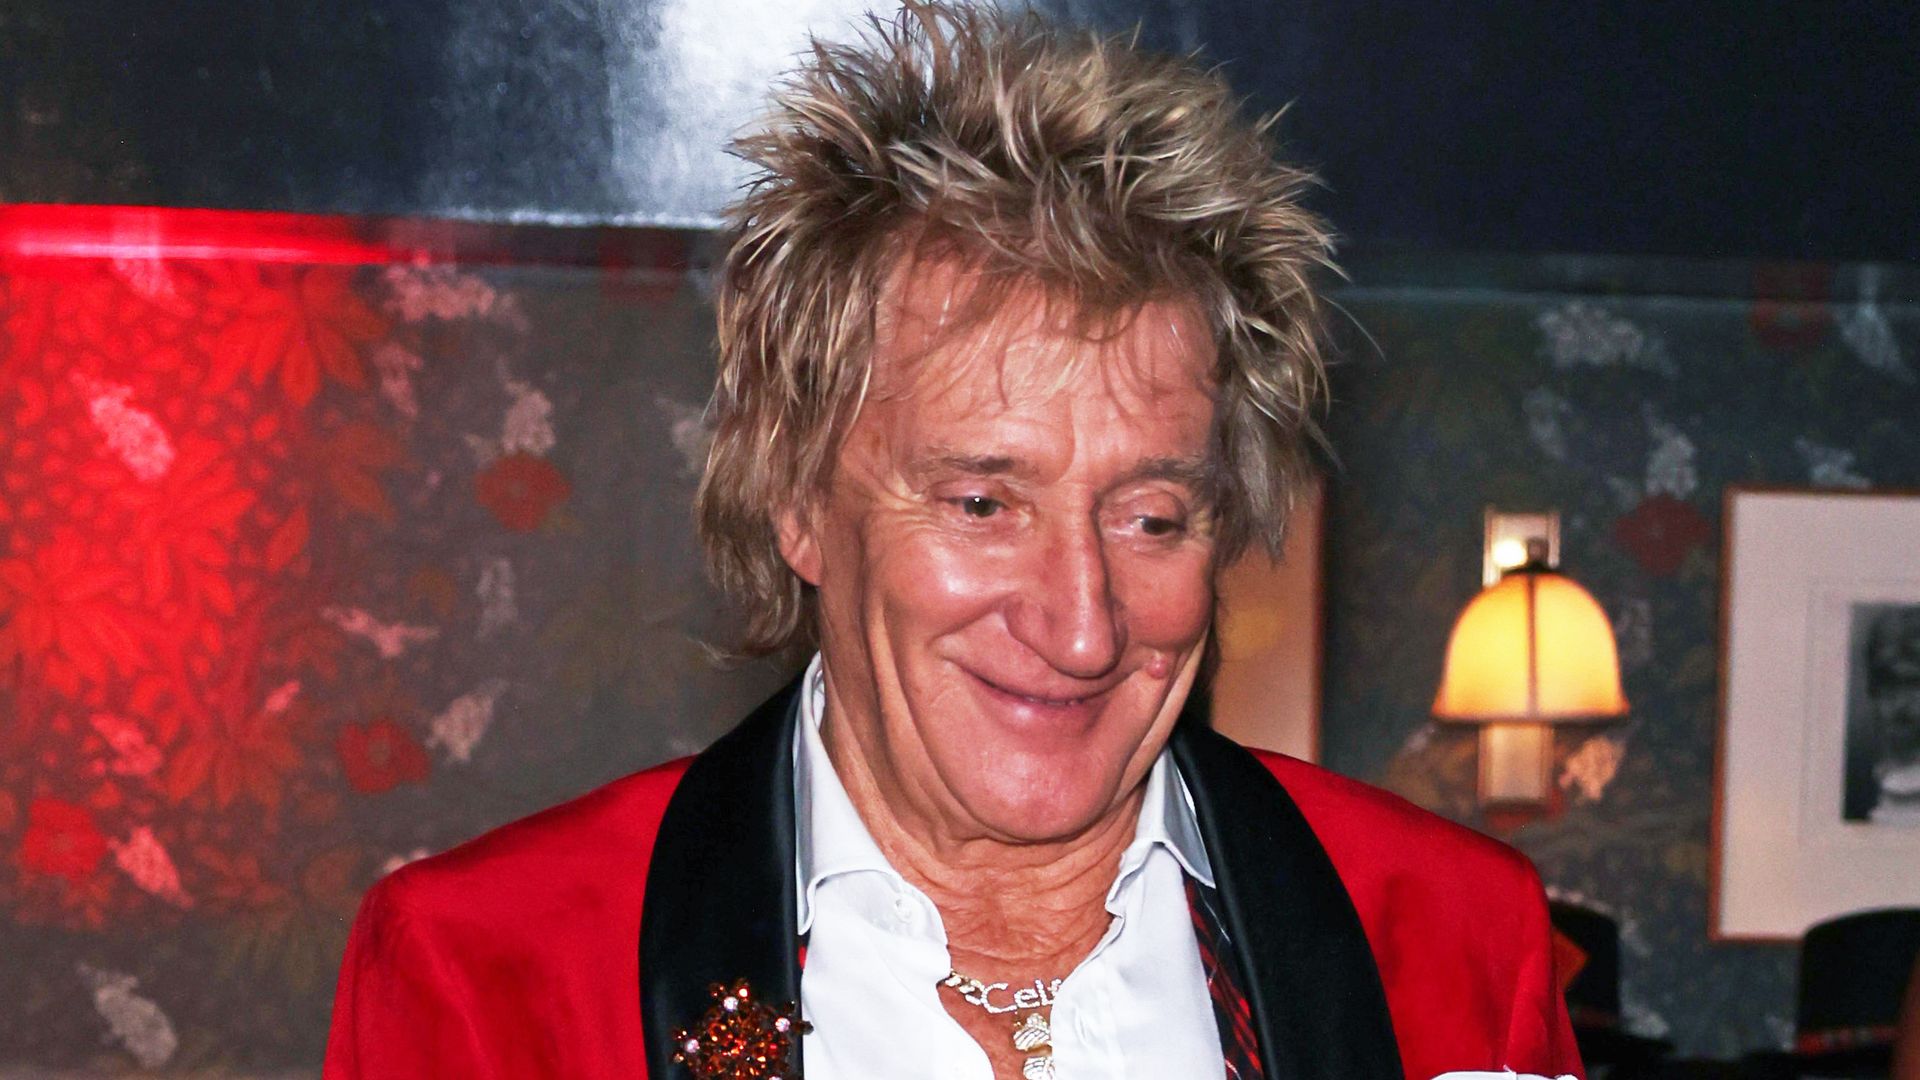 Rod Stewart in a red jacket and white shirt